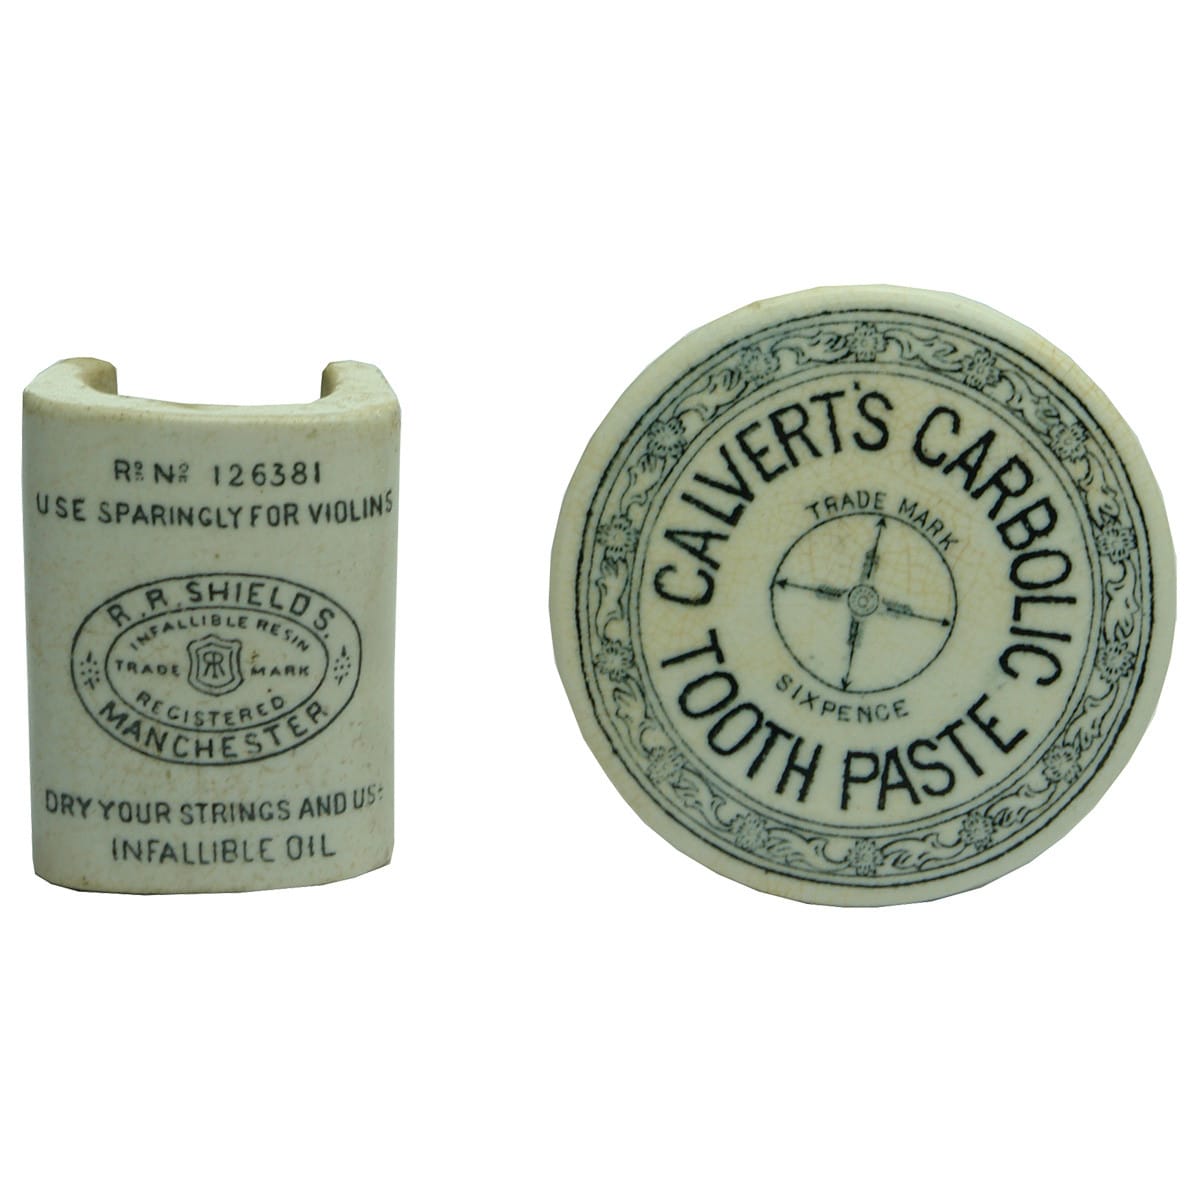 Pair of Pot Lid type items: Calvert's Carbolic Tooth Paste and Shields Violin String resin holder.